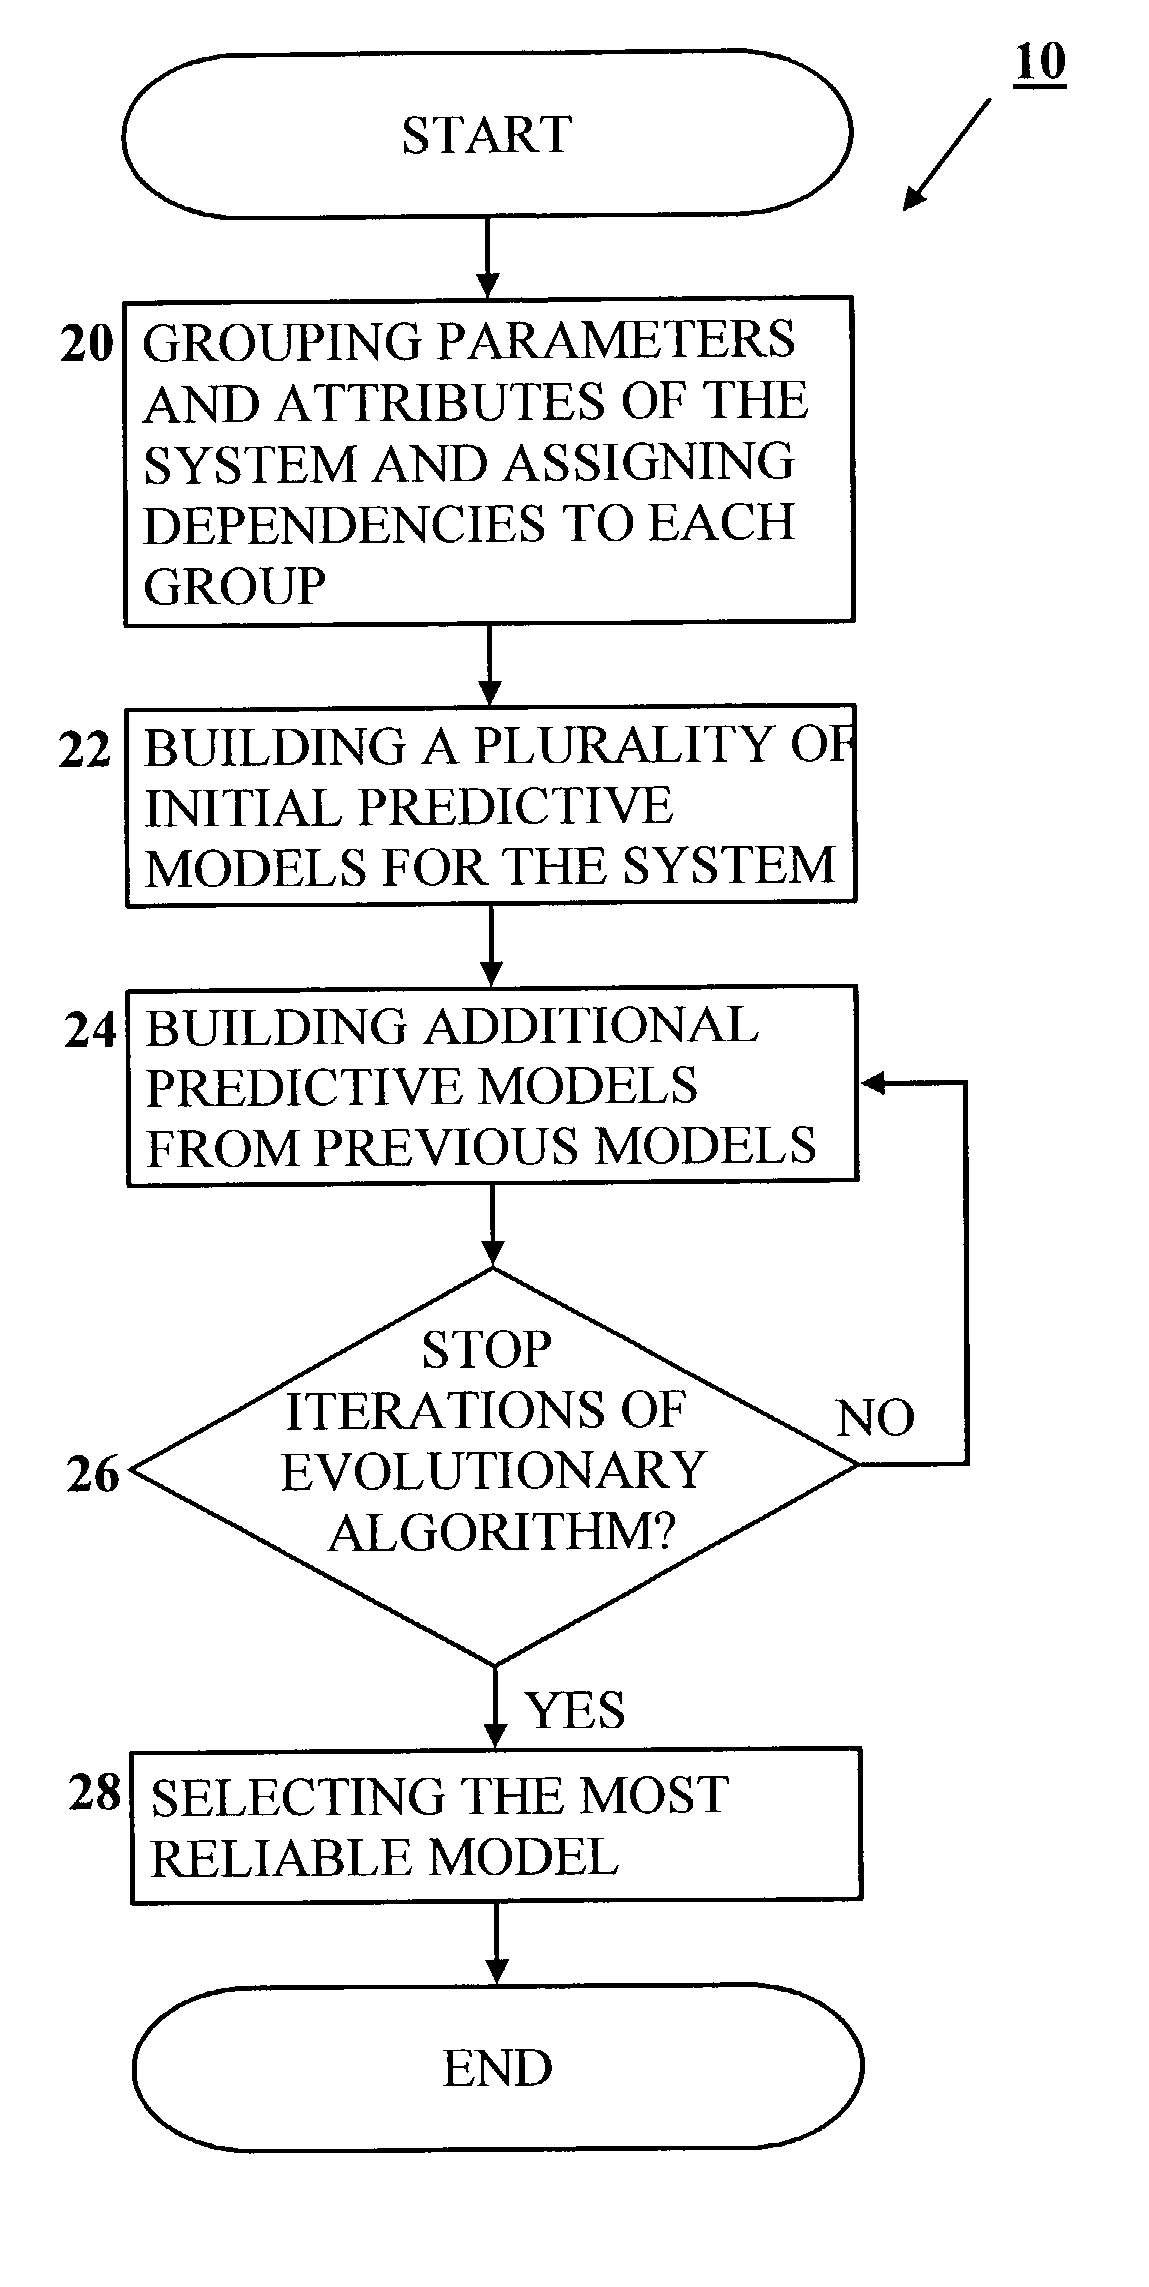 Method and apparatus for knowledge-driven data mining used for predictions